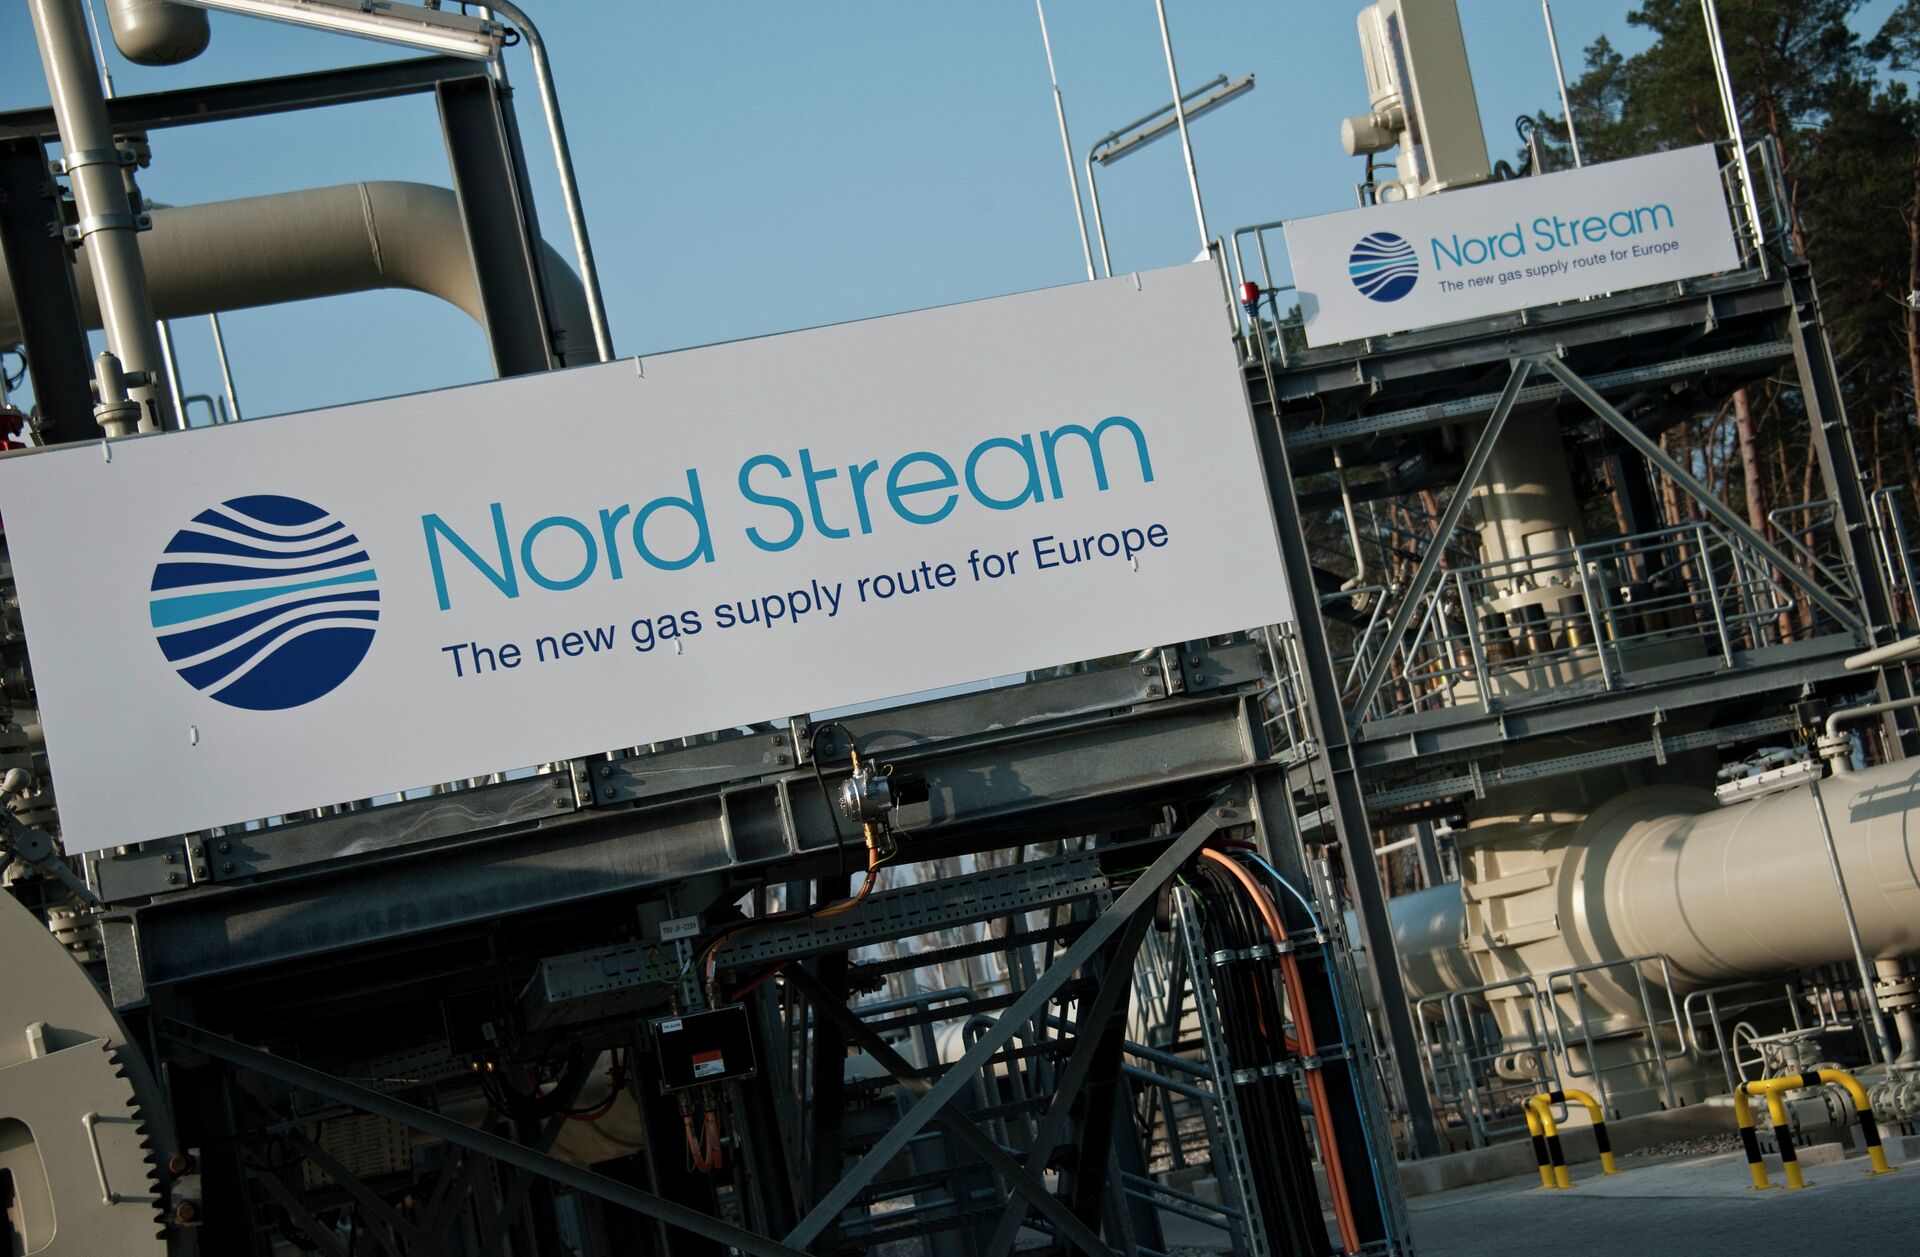 View of the Nordstream gas pipeline terminal prior to an inaugural ceremony for the first of Nord Stream's twin 1,224 kilometre gas pipeline through the baltic sea, in Lubmin November 8, 2011 - Sputnik International, 1920, 10.07.2022